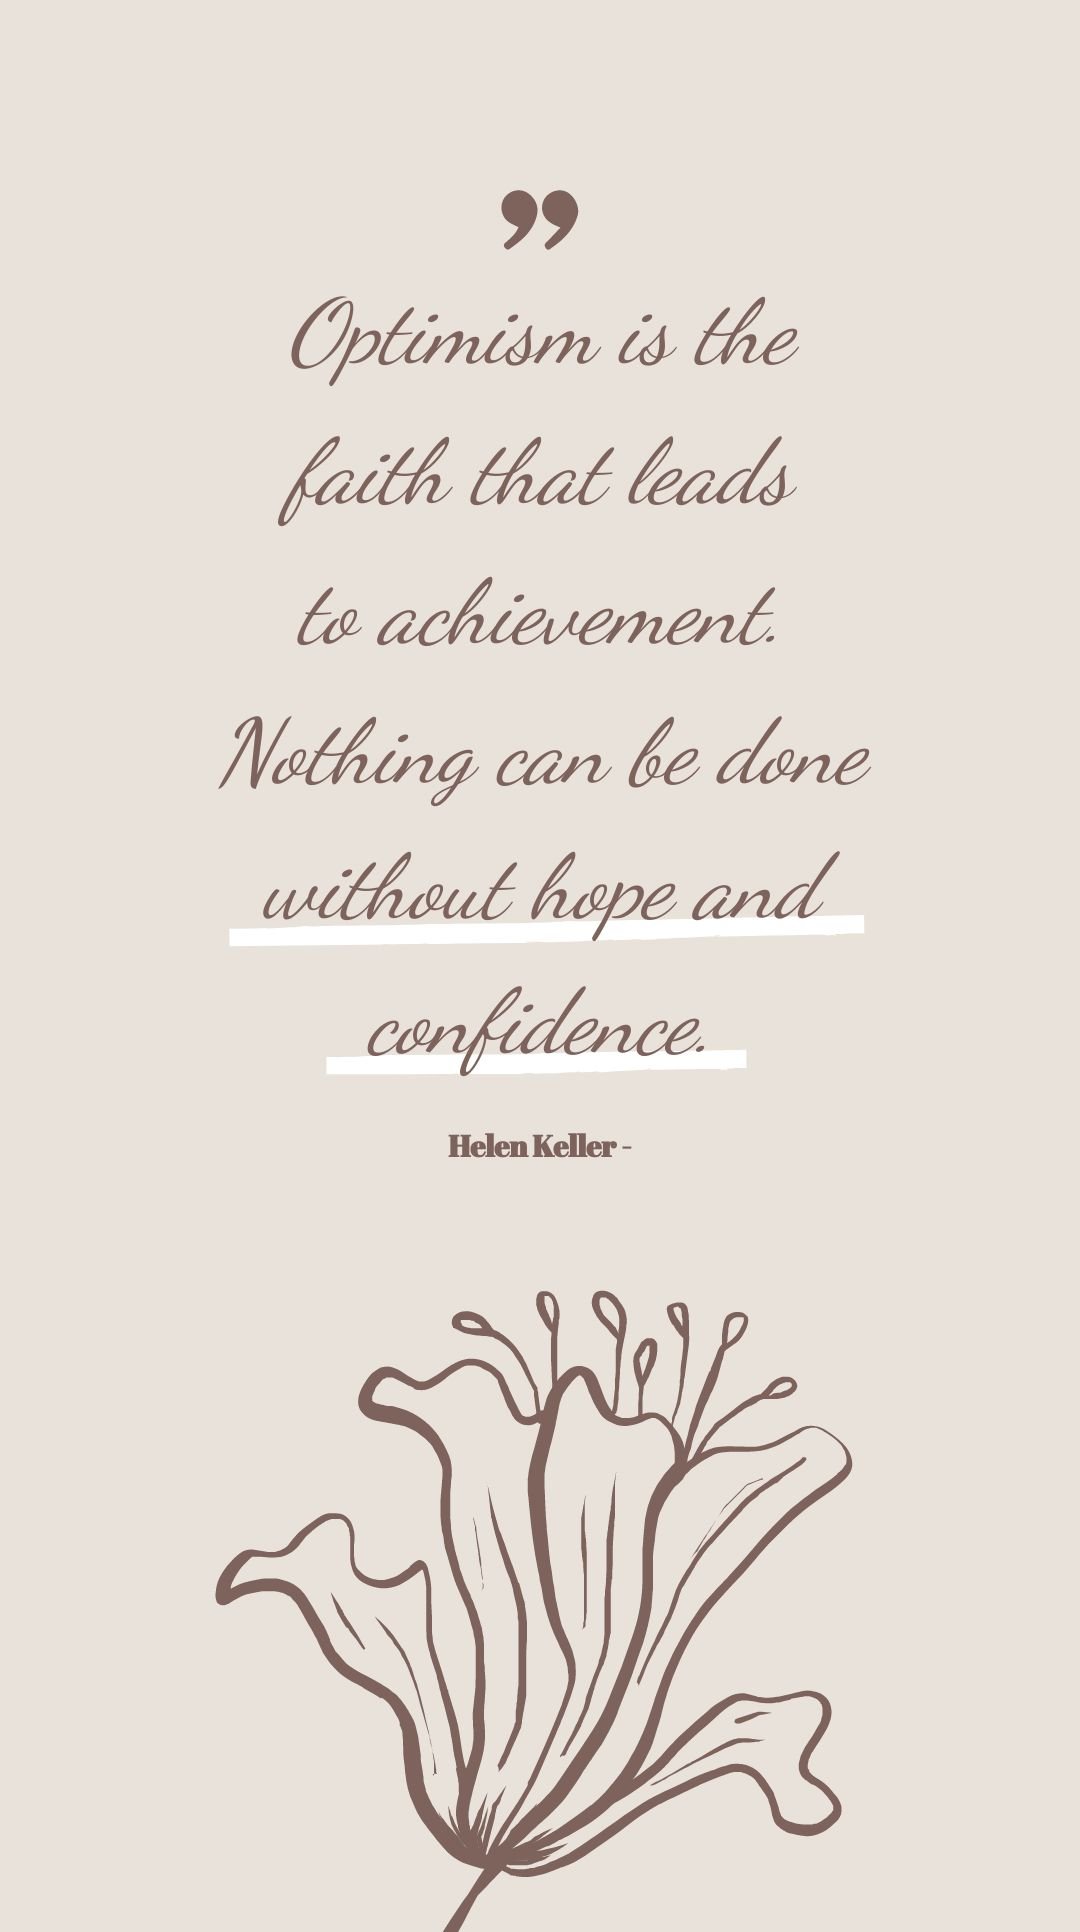 Helen Keller - Optimism is the faith that leads to achievement. Nothing can be done without hope and confidence.